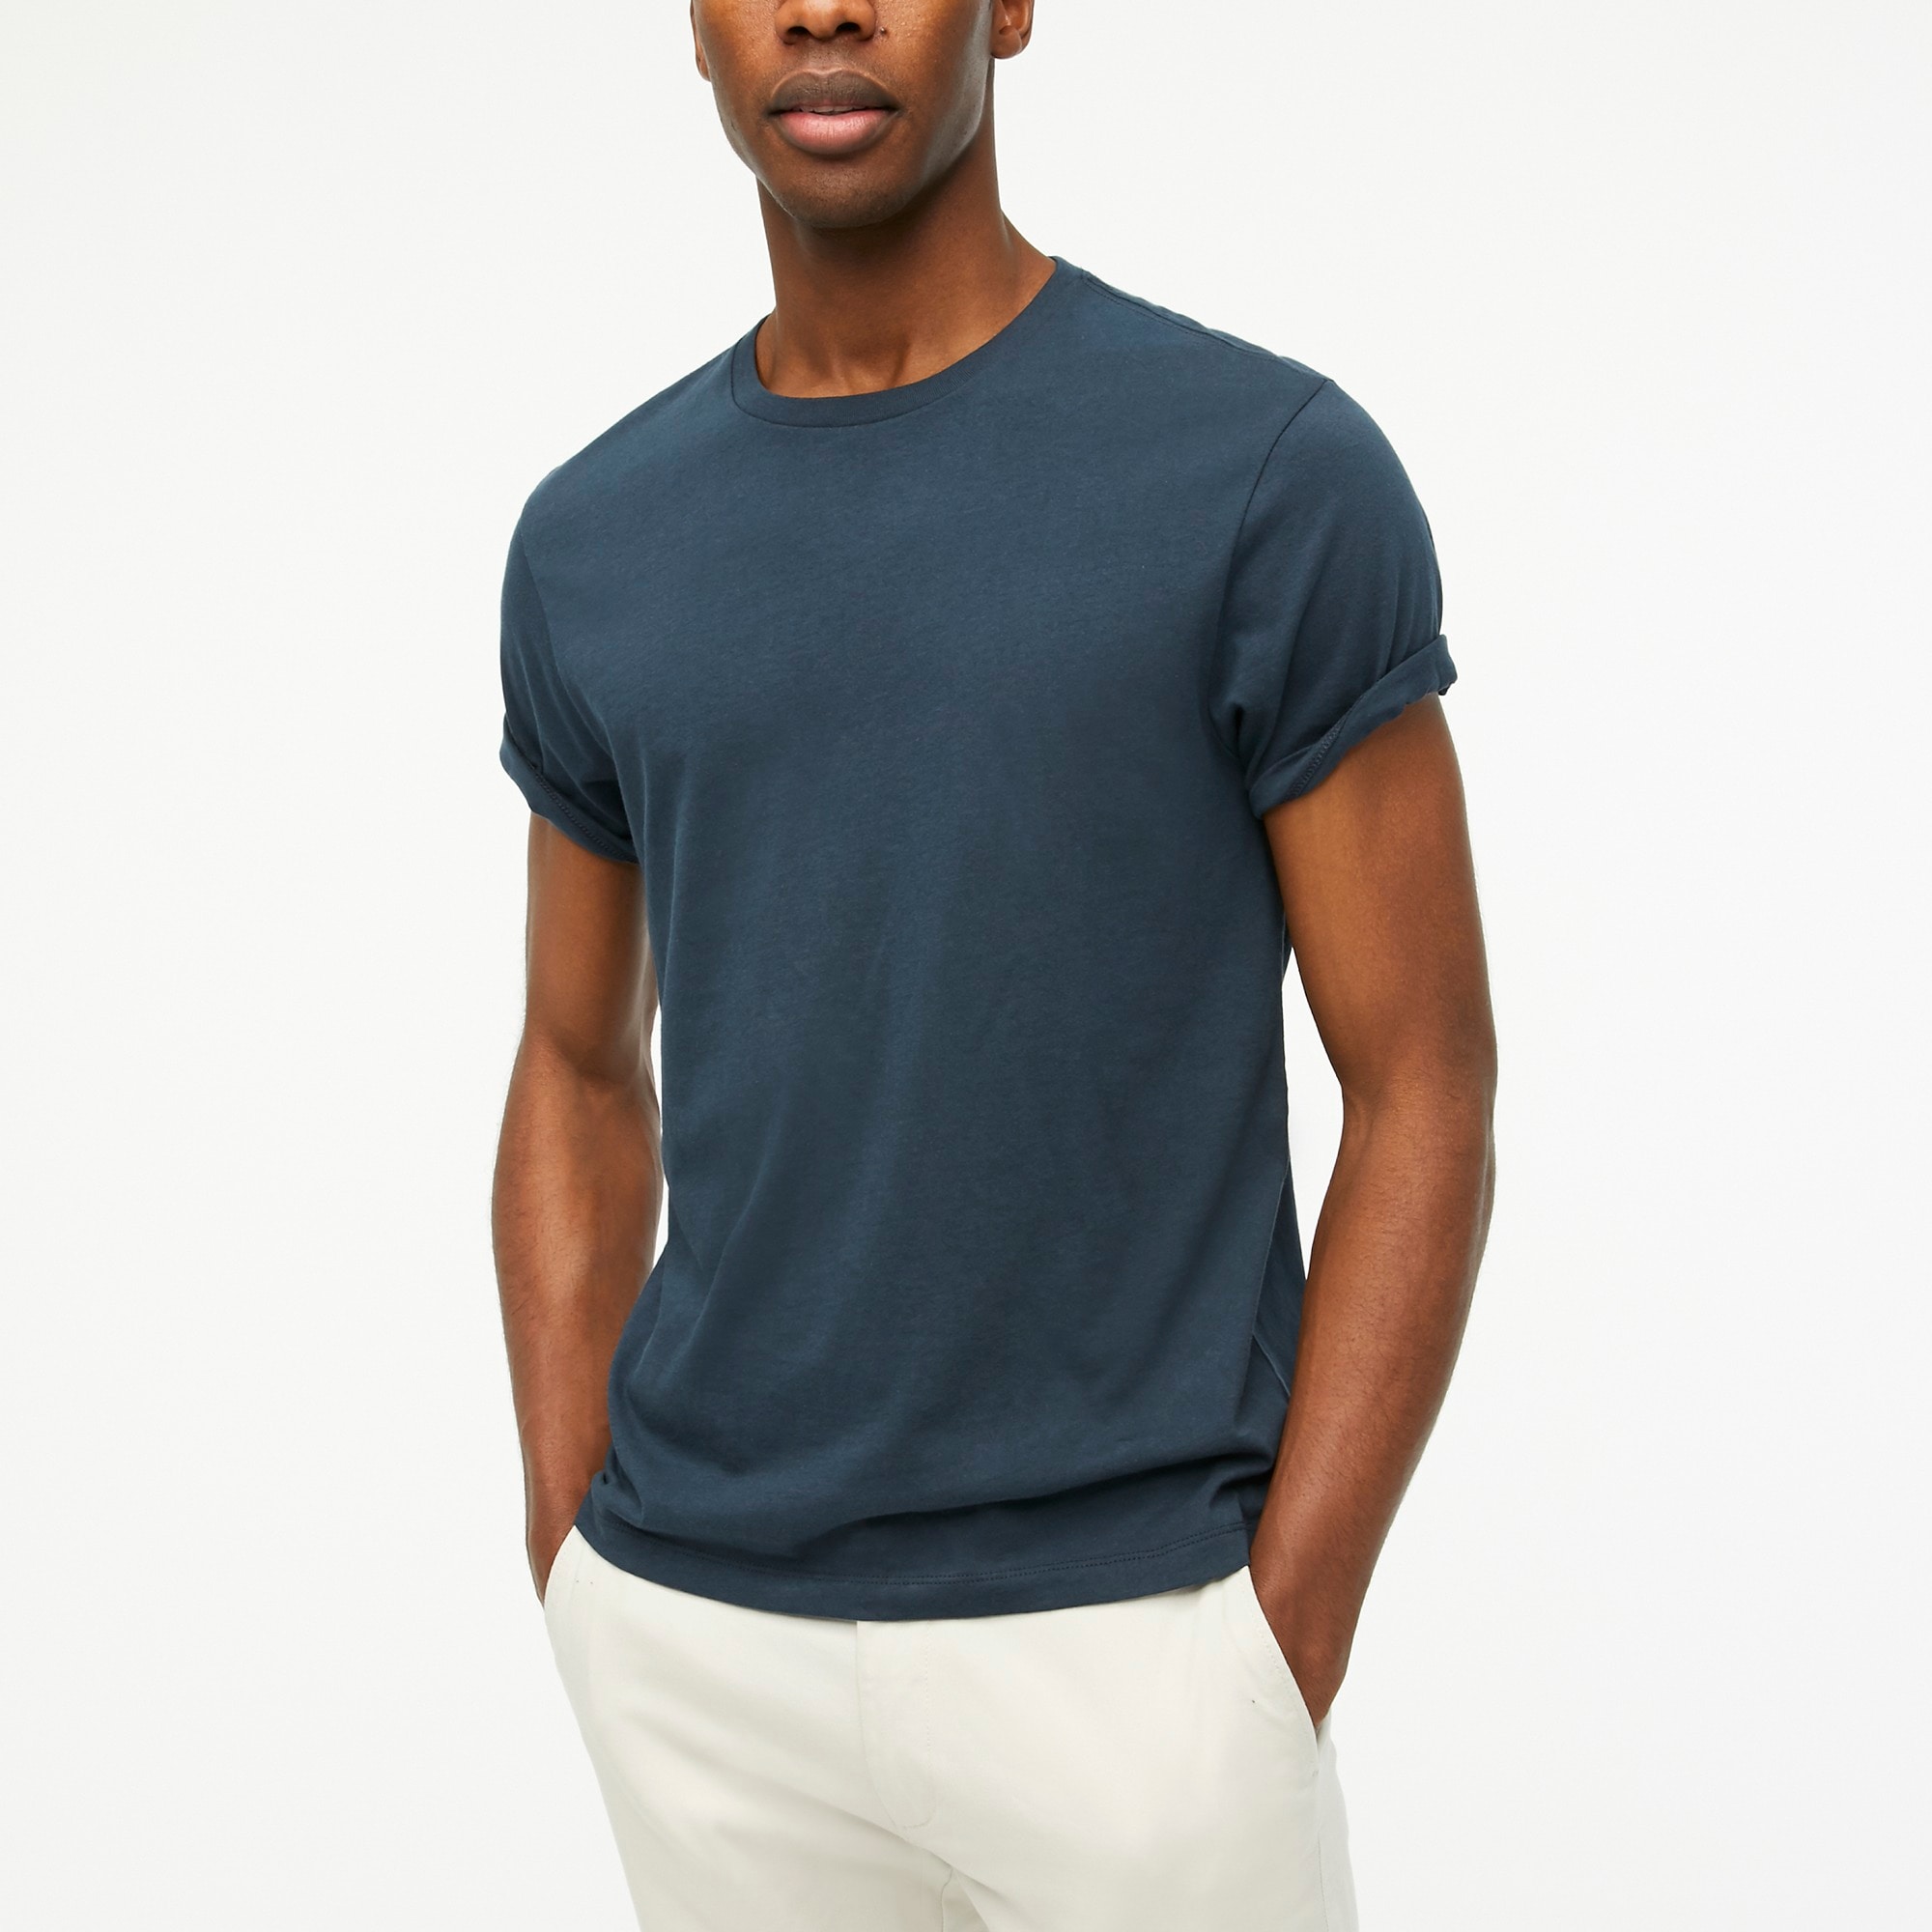 Jcrew Washed jersey tee